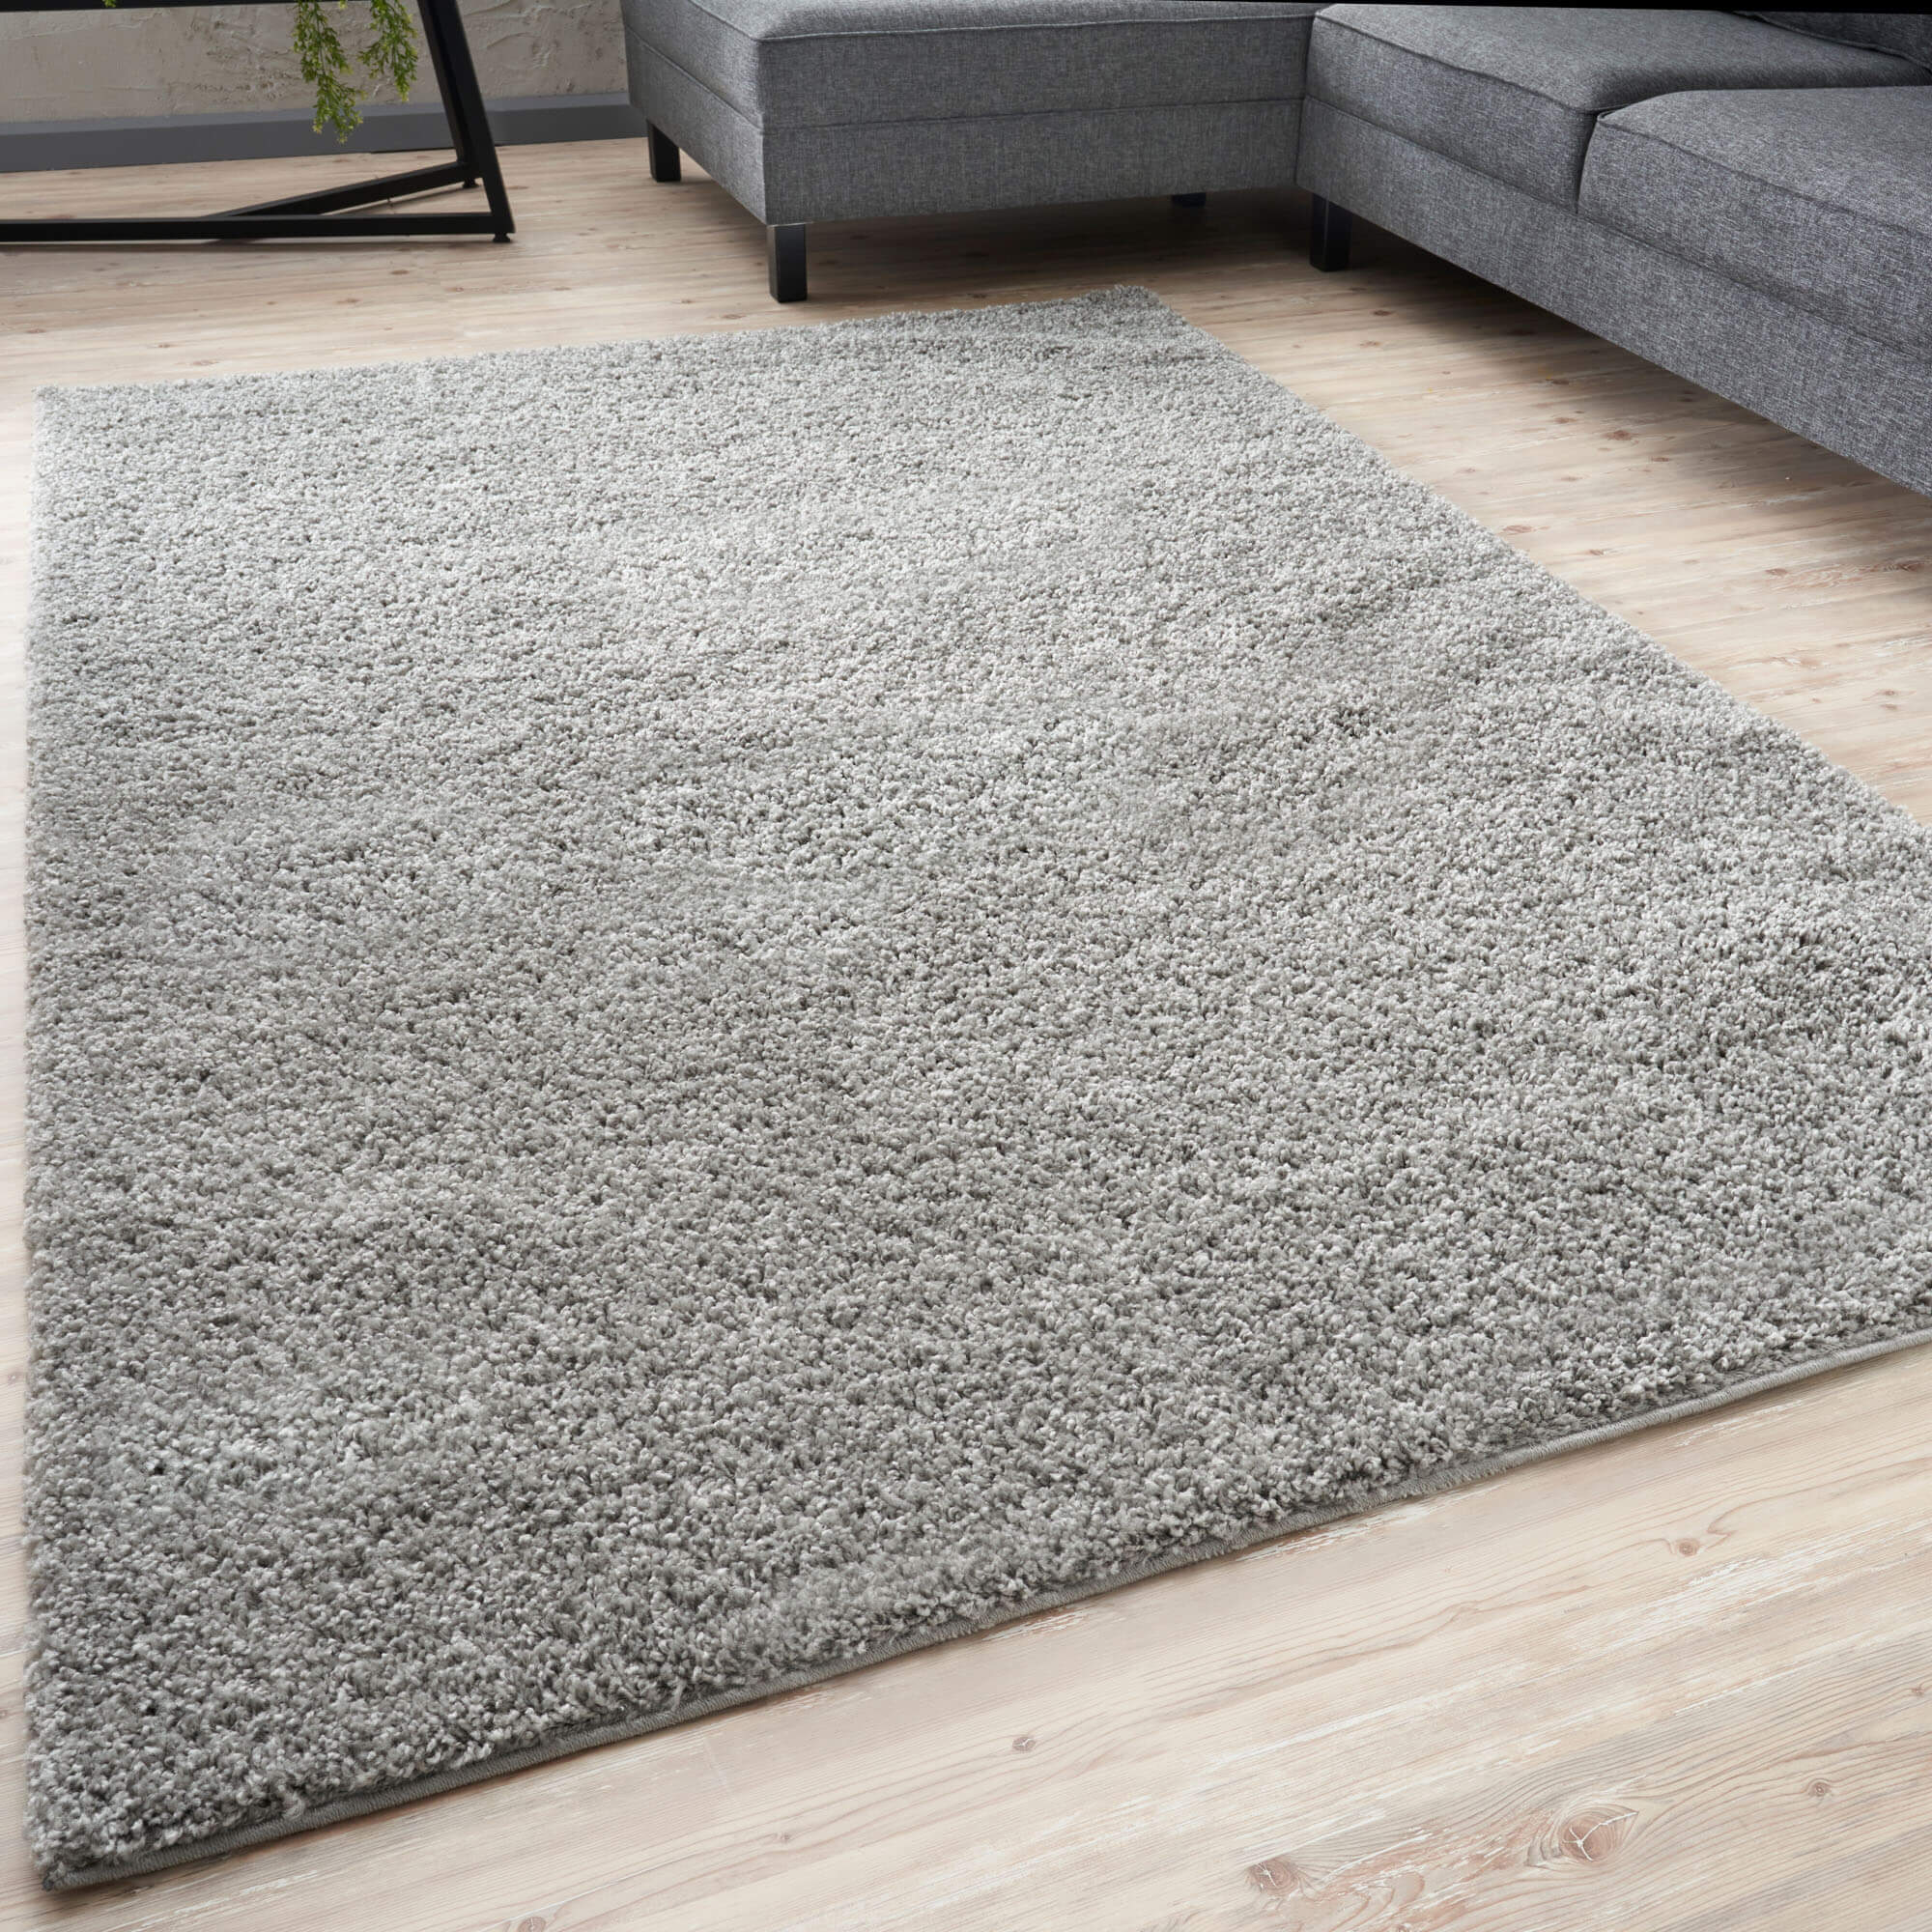 Shaggy Rugs: Fluffy, Thick & High Pile Rug | The Rugs